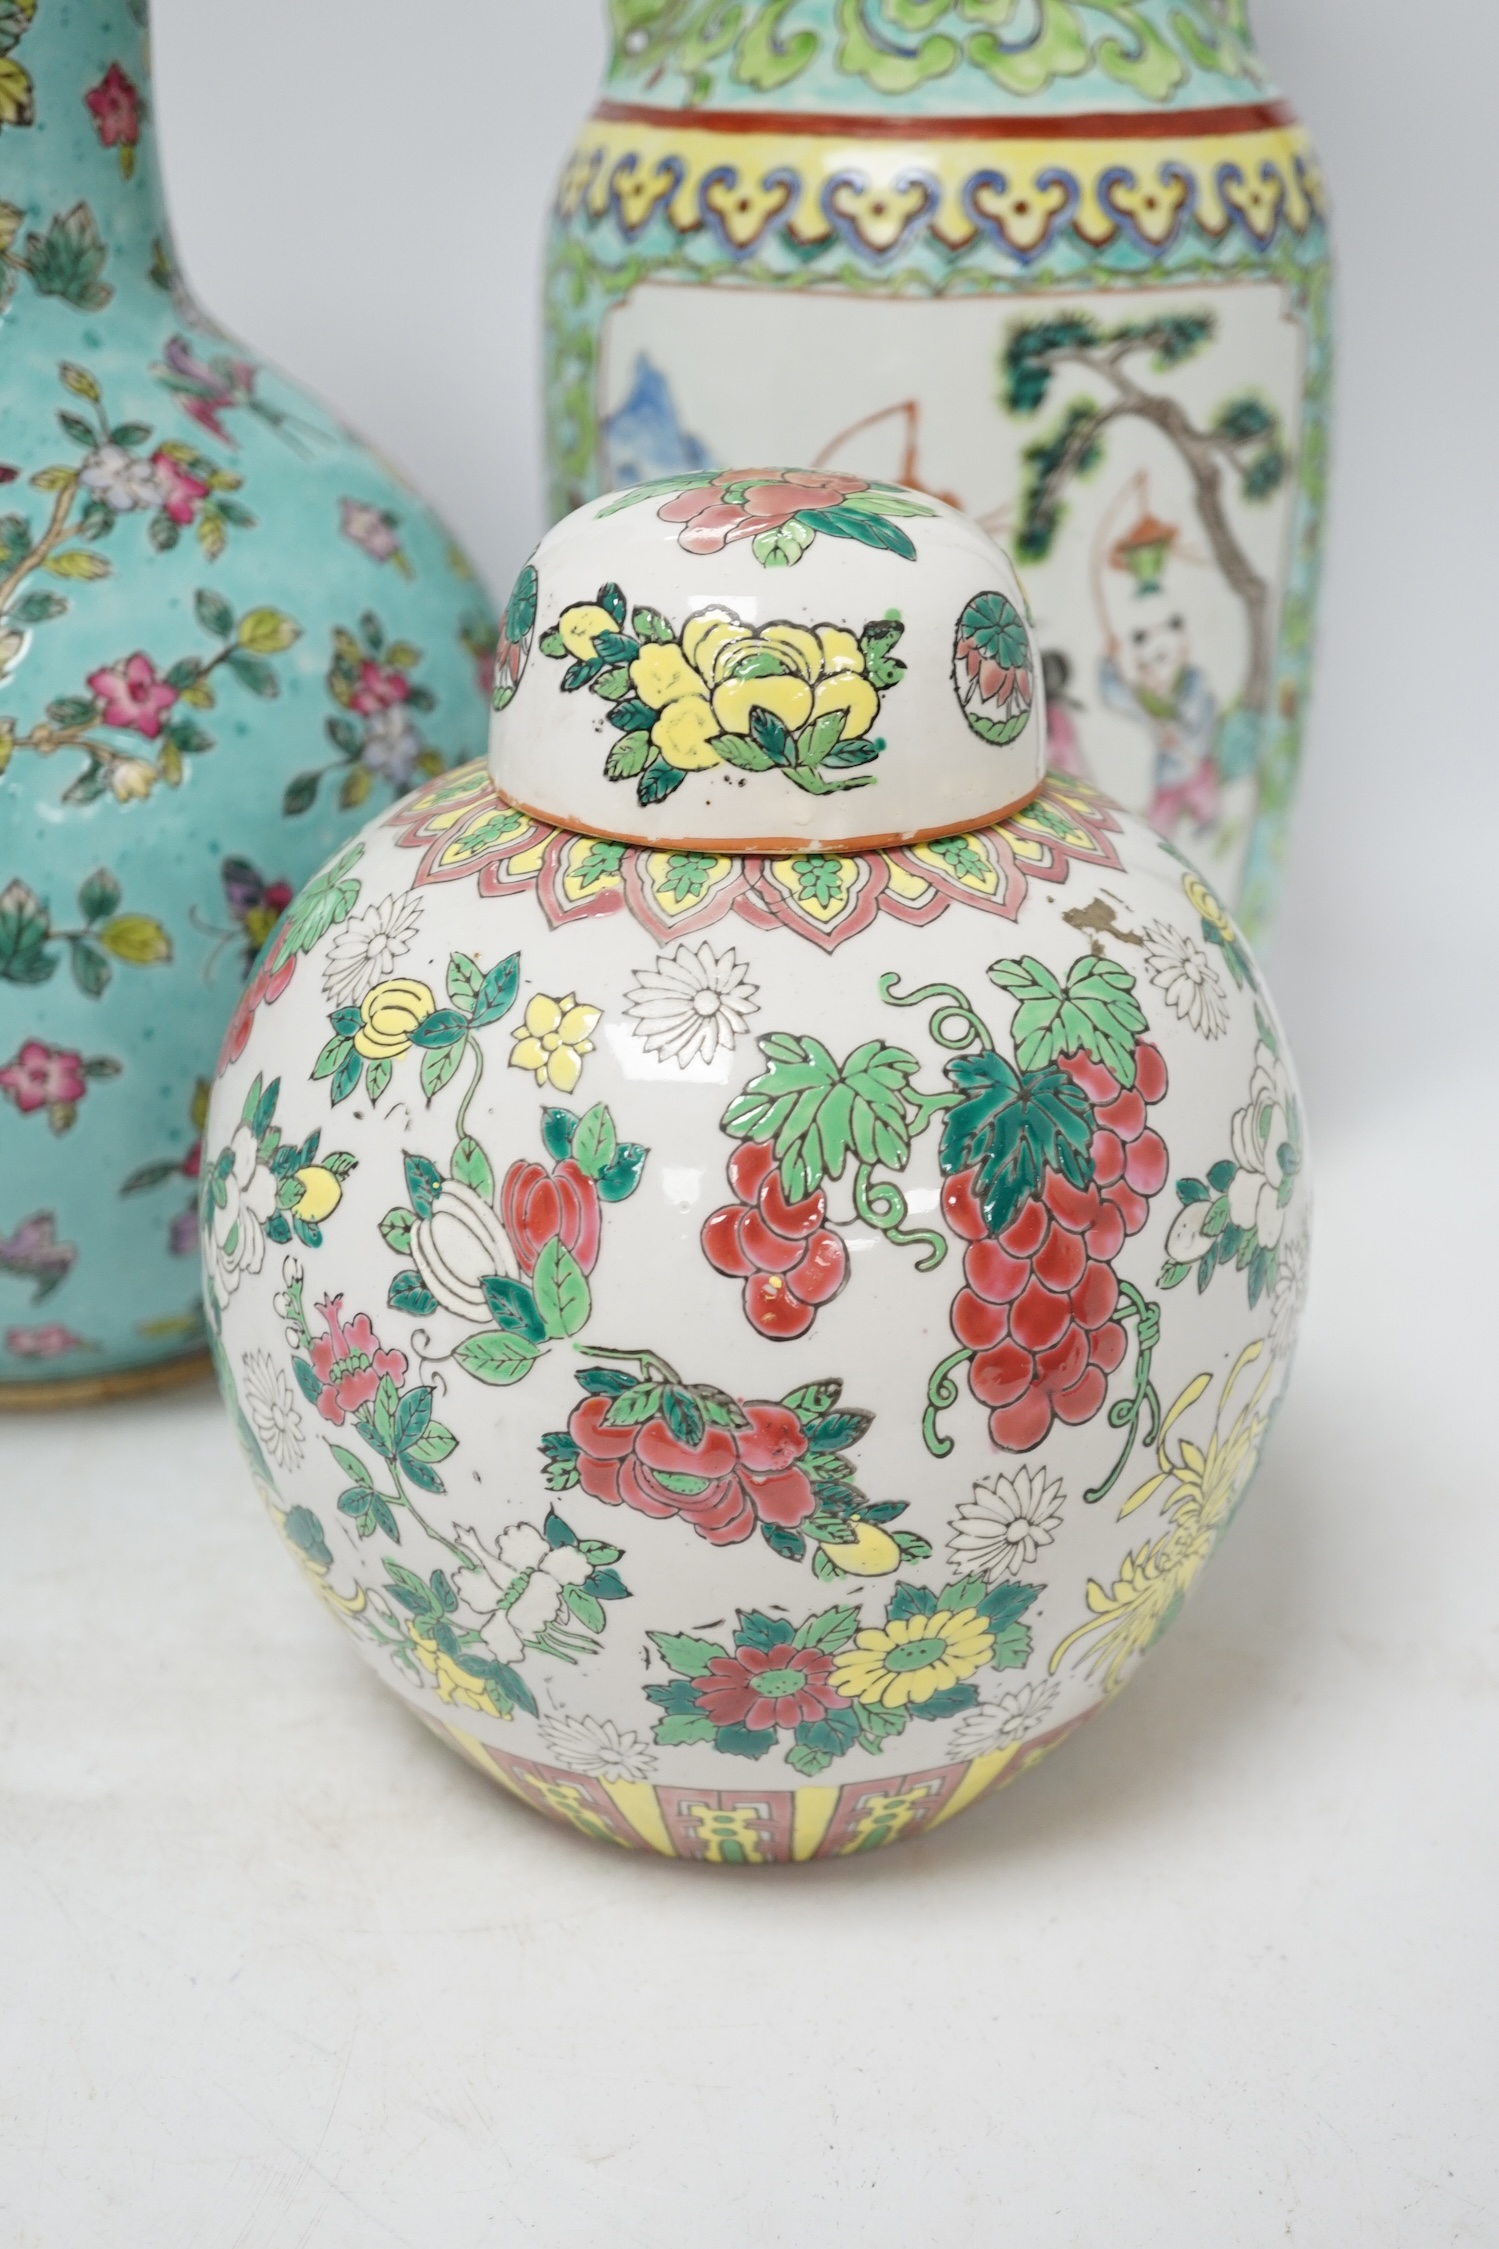 Two 20th century Chinese famille rose vases and a similar jar and cover, tallest 40cm. Condition - good